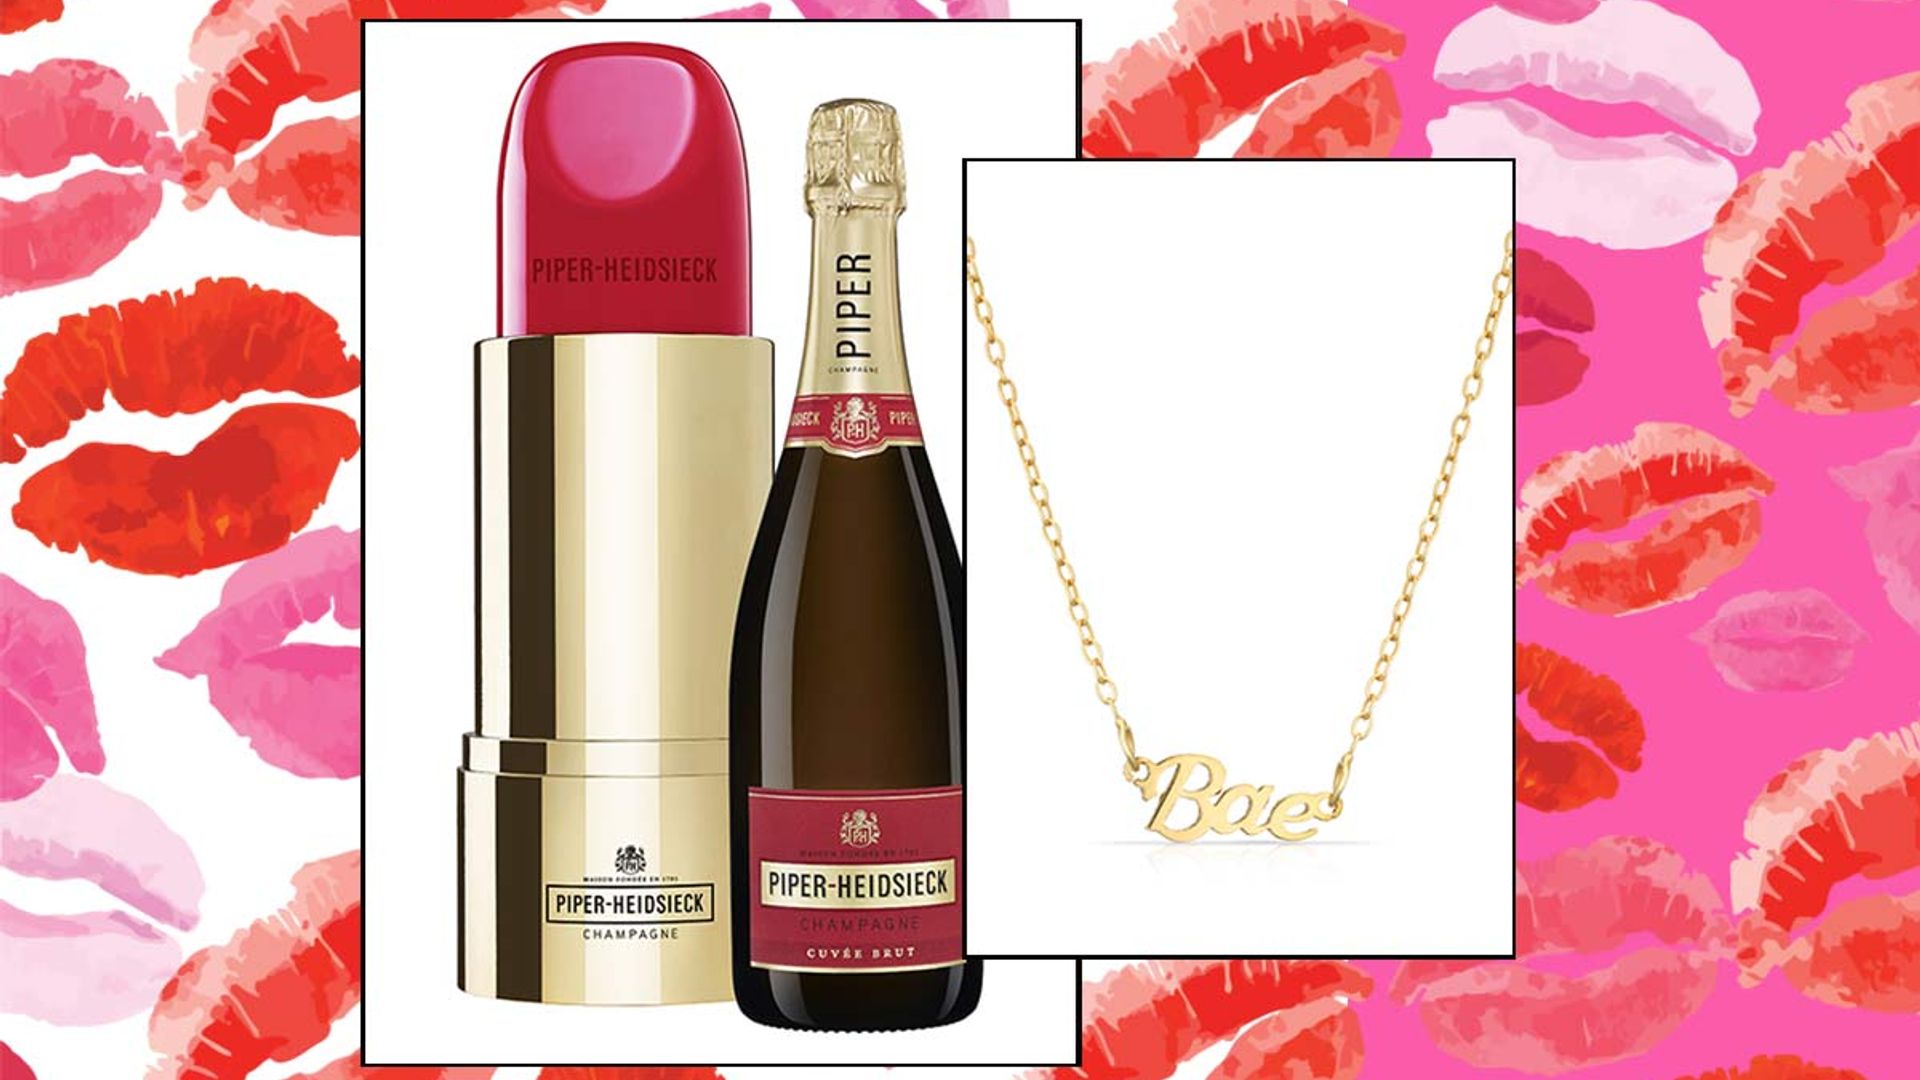 30 Galentine's Day gift ideas to make your bestie smile